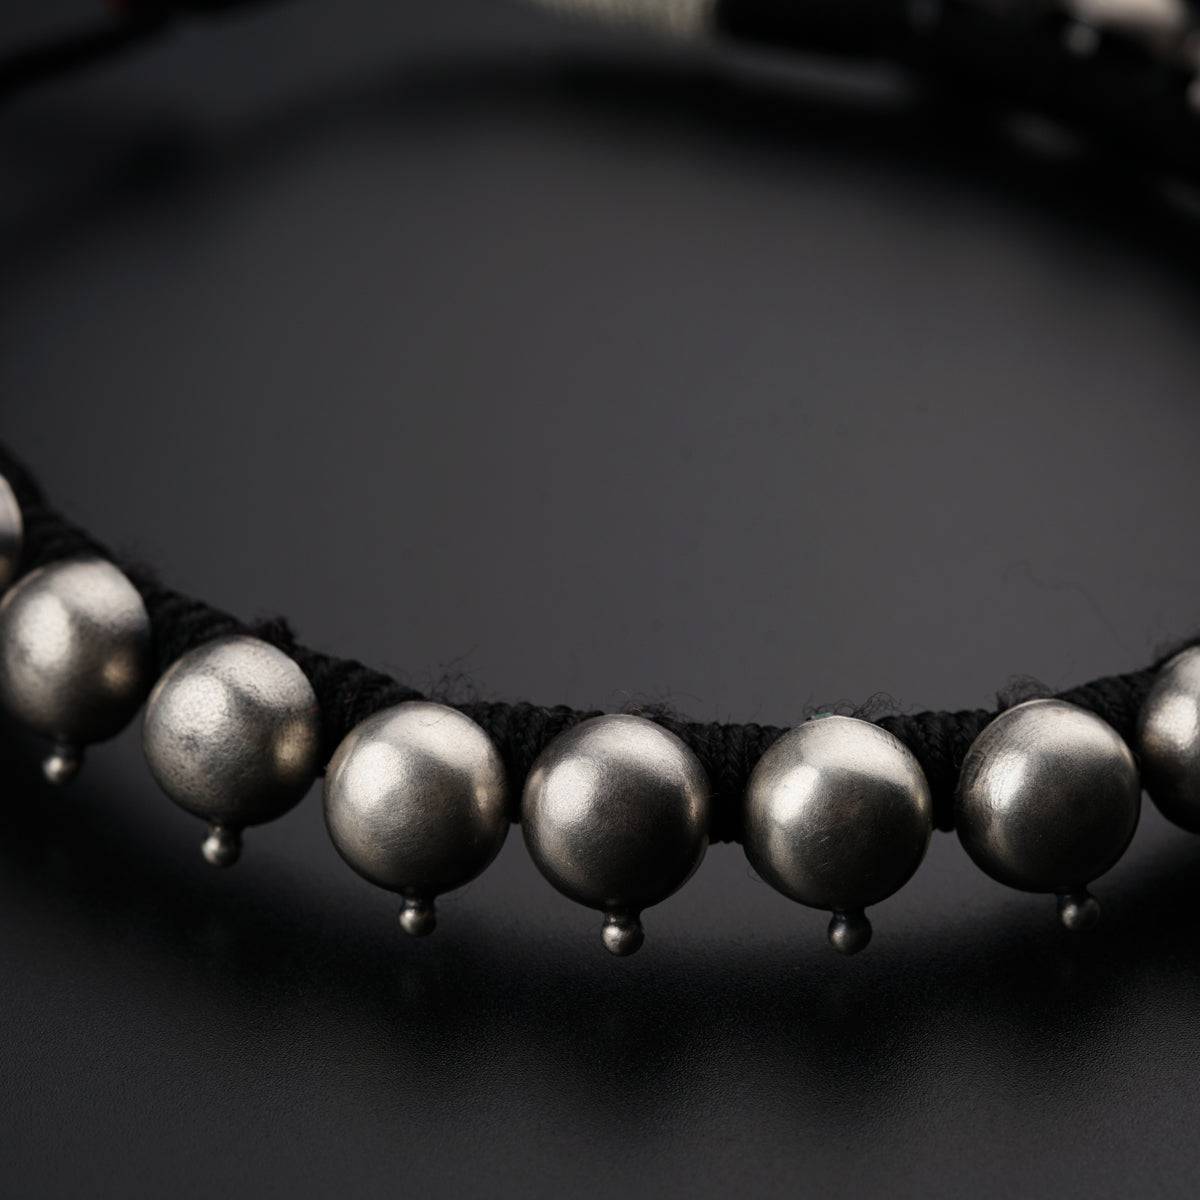 a close up of a necklace on a black surface